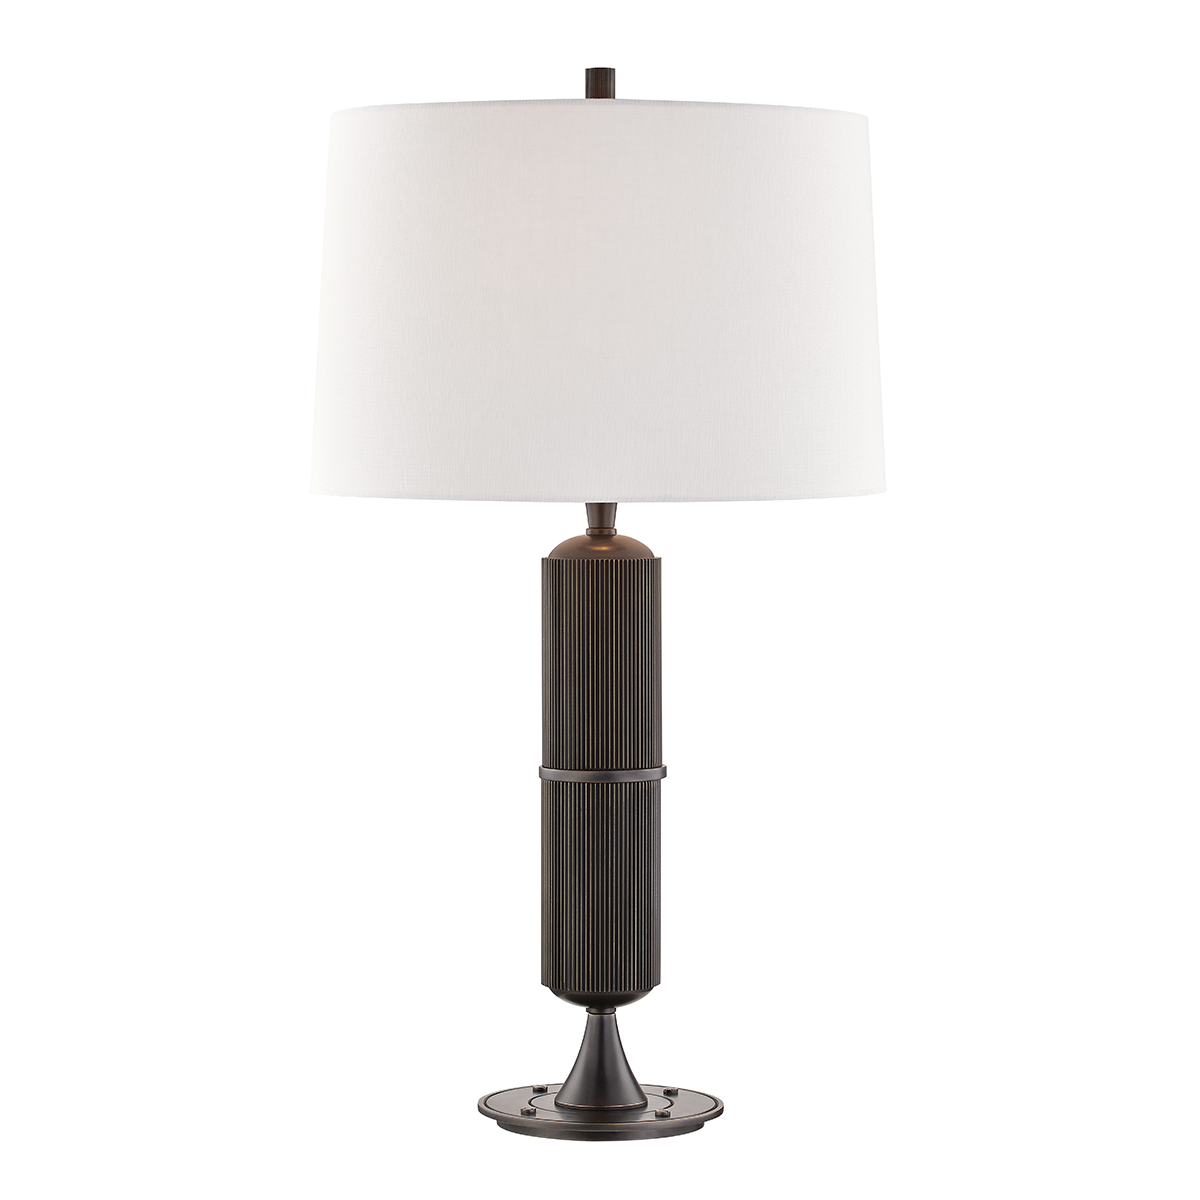 Steel Robust Column Base with Fabric Shade Table Lamp